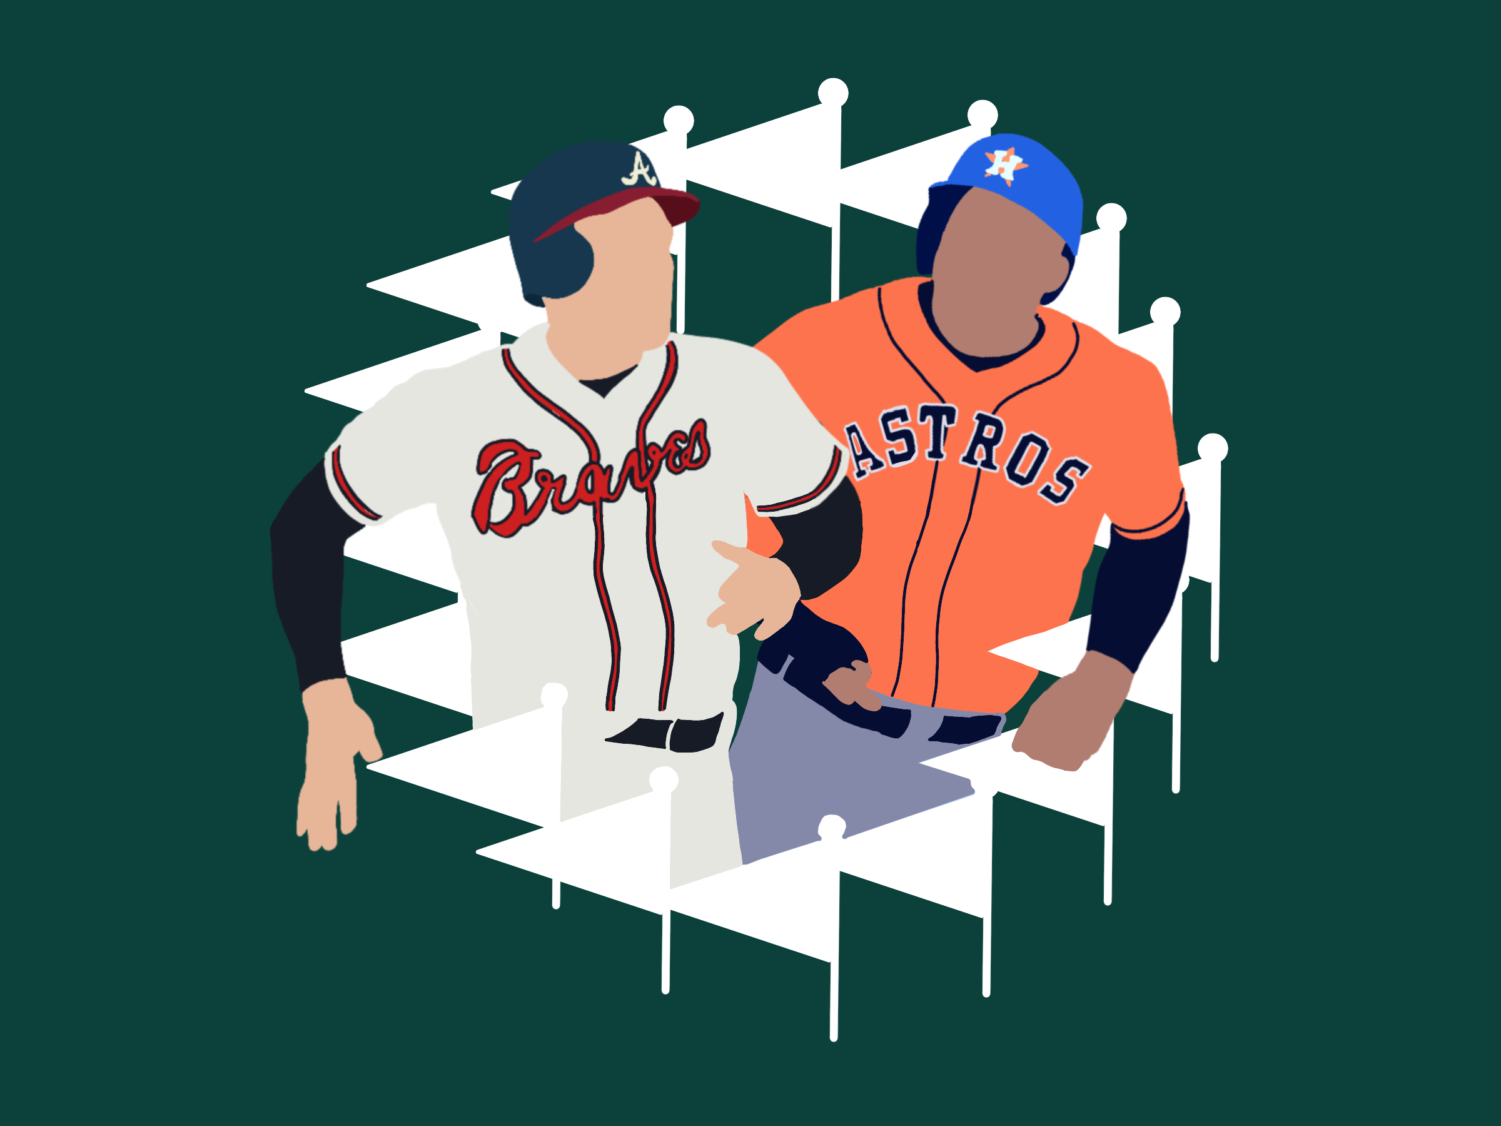 World Series 2021 - What's next for Astros-Braves? Answering the